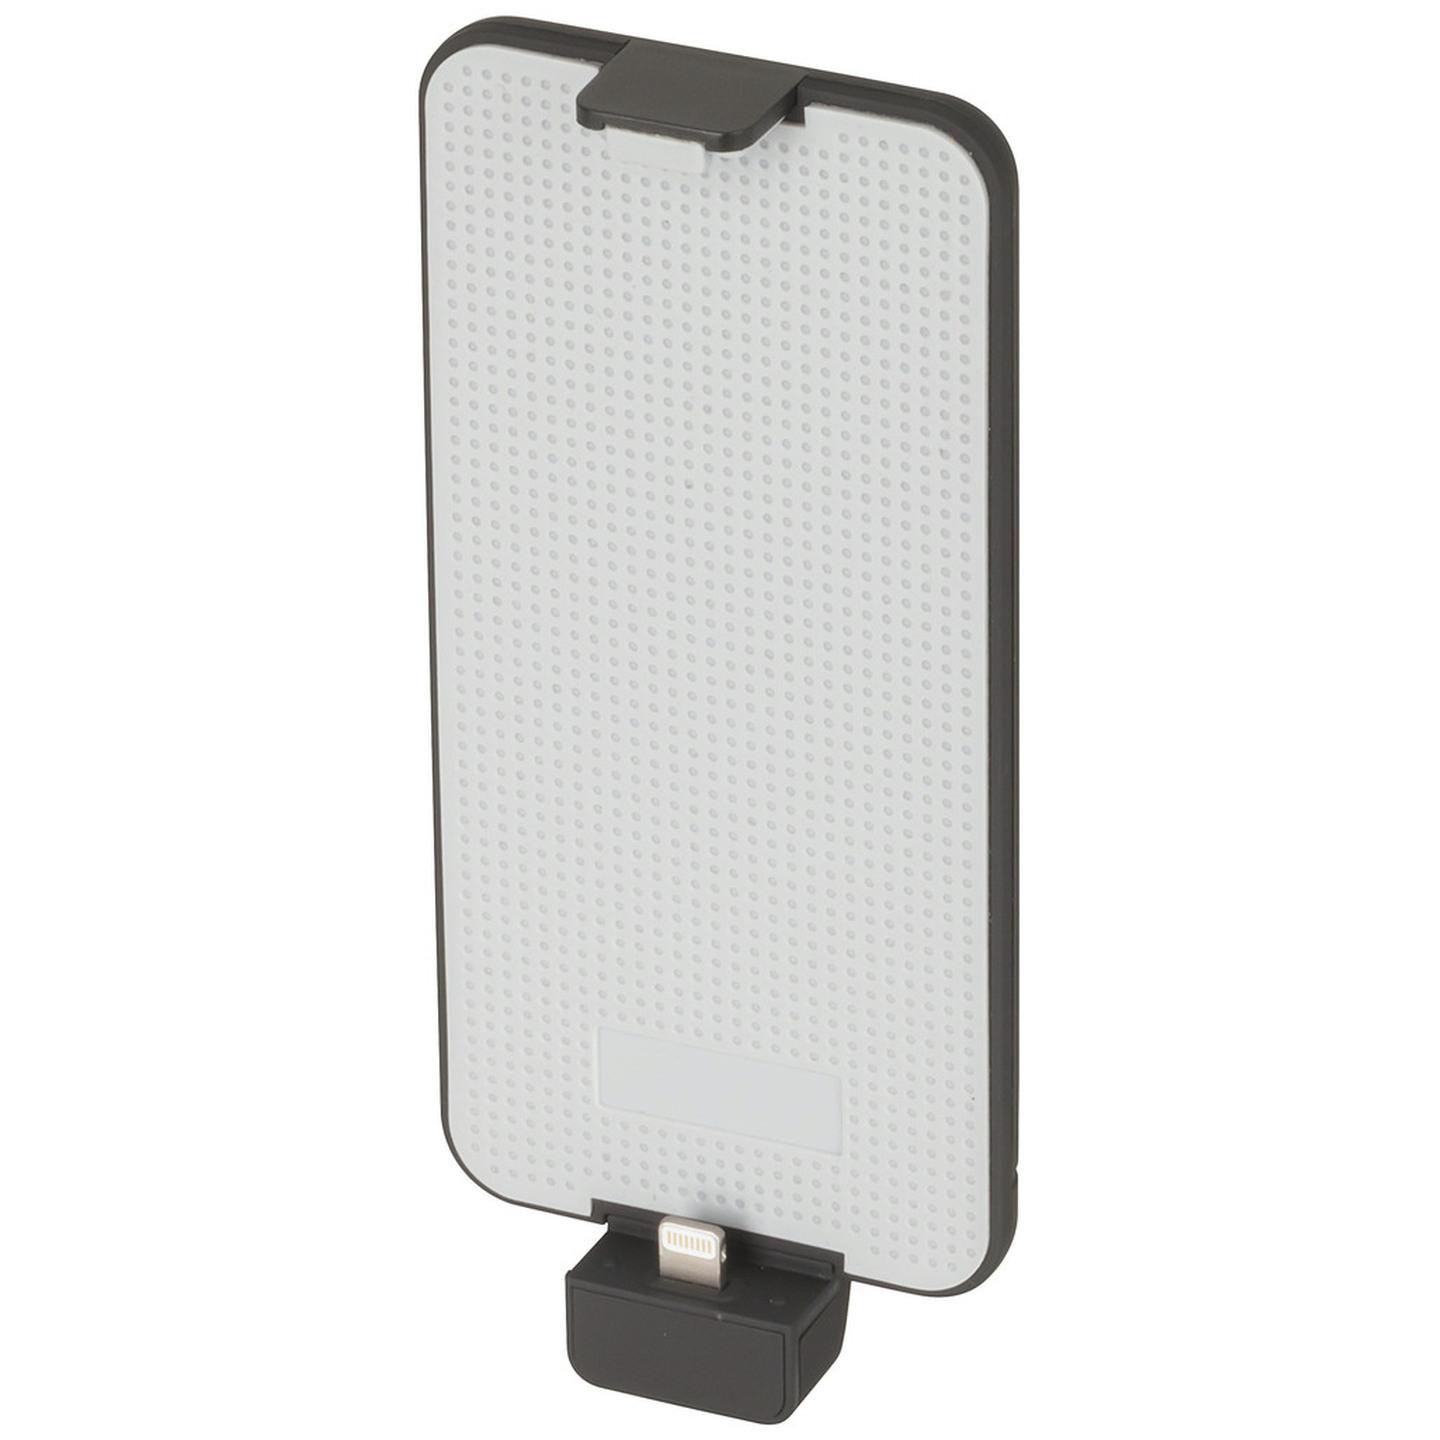 Adjustable Back-Up Battery Case to suit iPhone with Lightning Plug